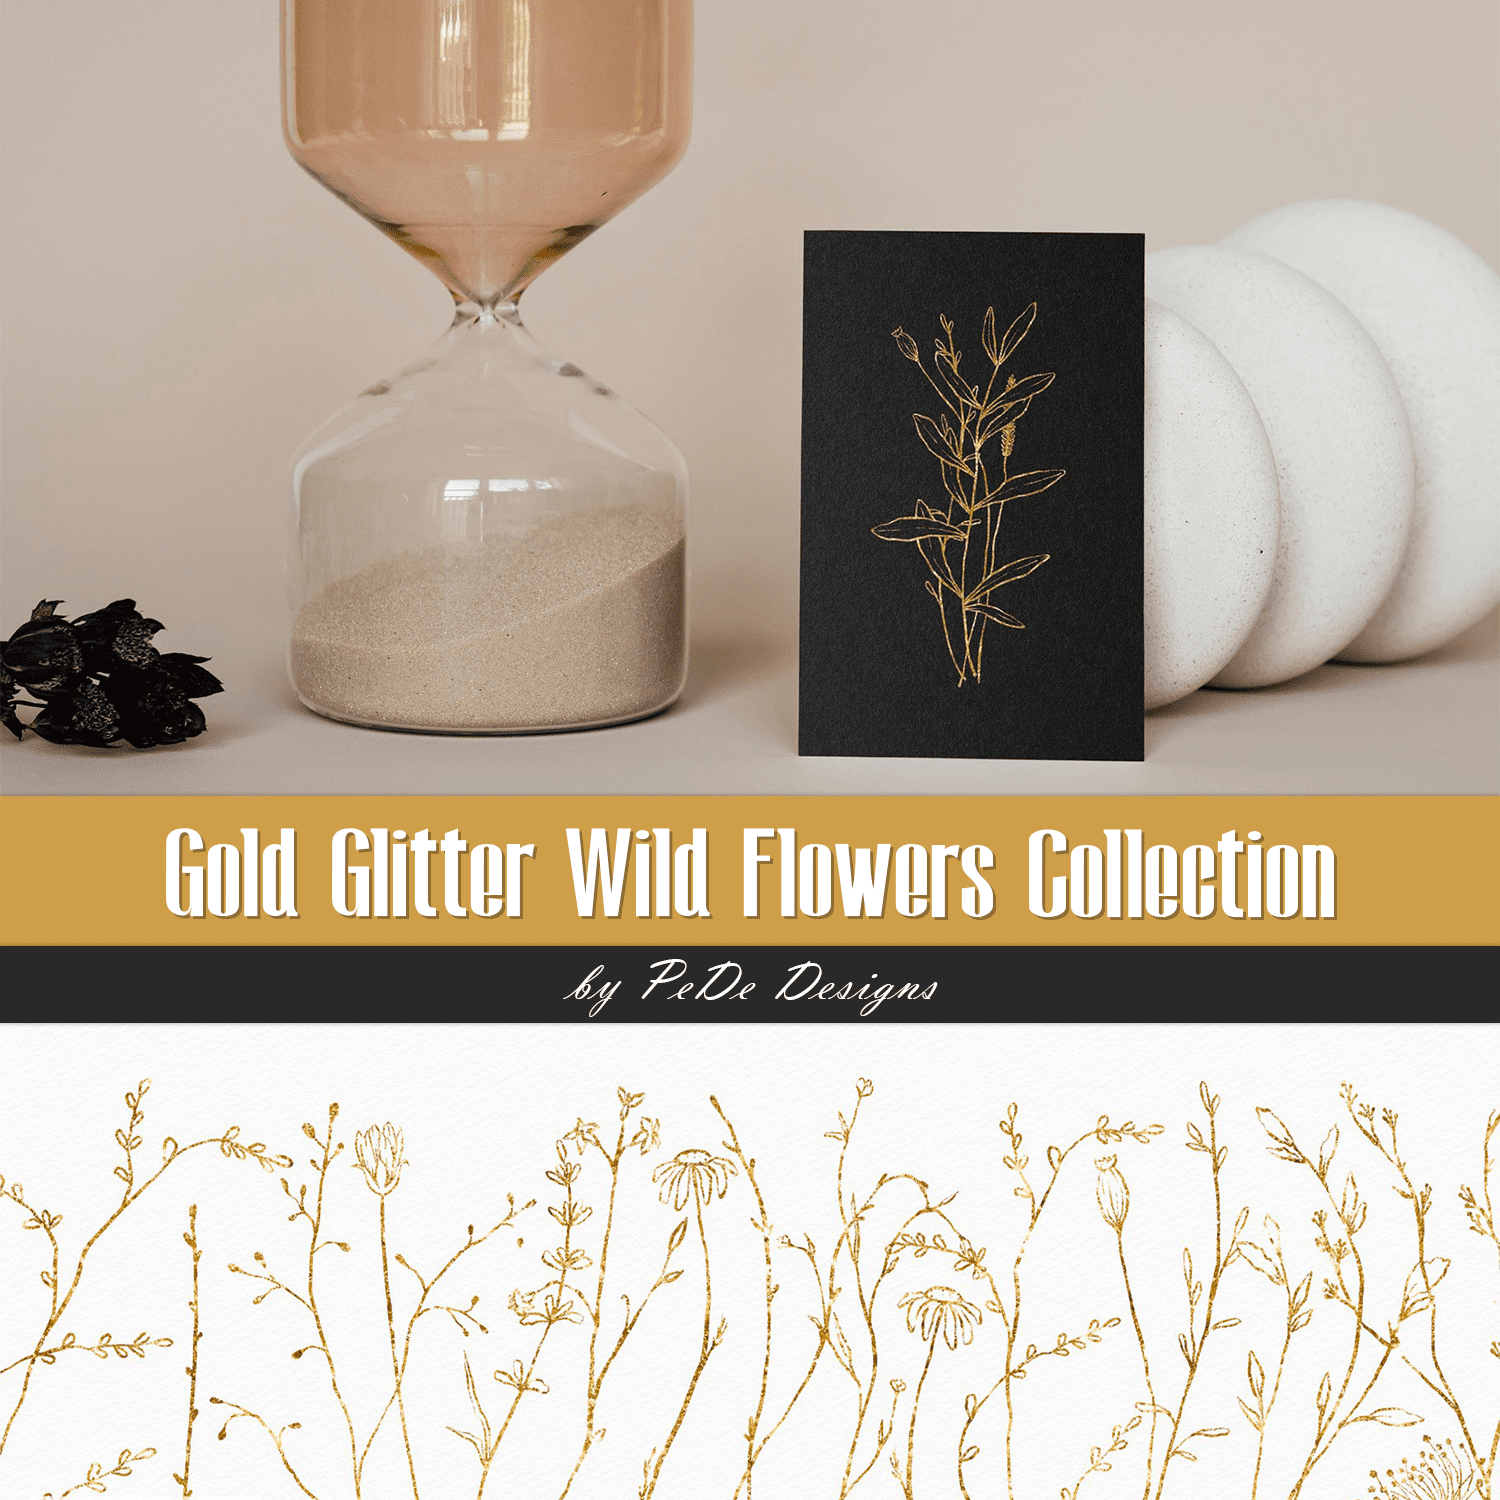 Gold Glitter Wild Flowers Collection cover.